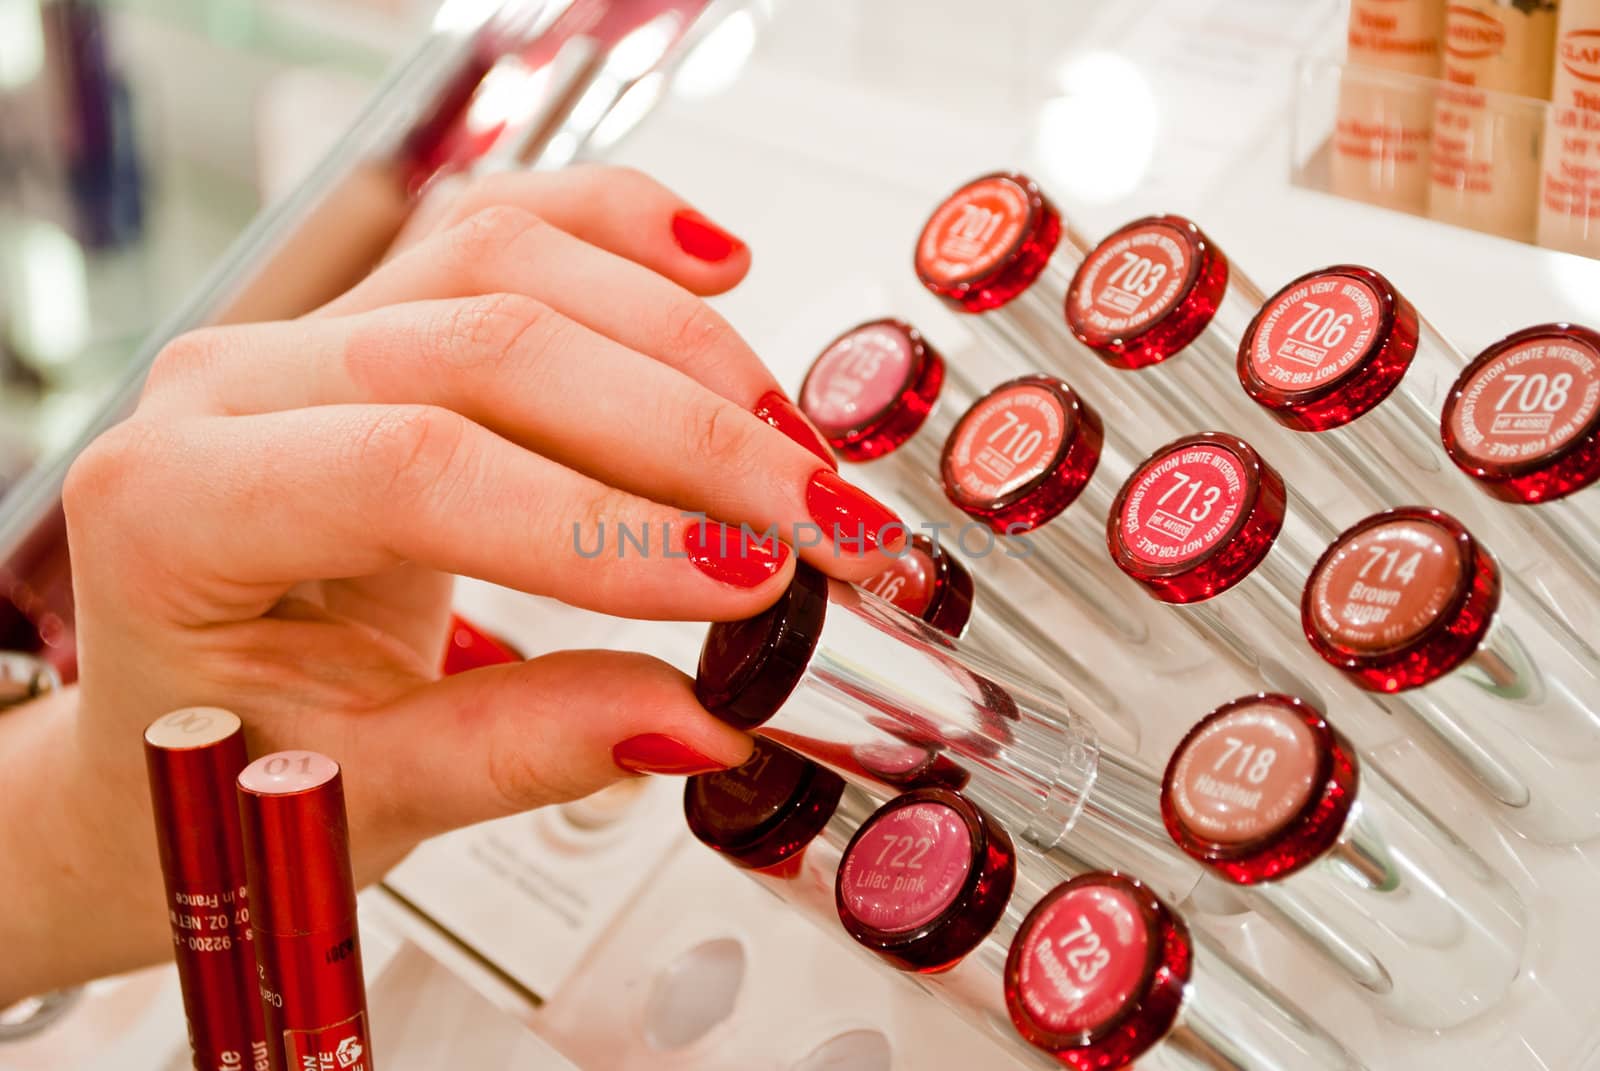 Young woman selecting make-up in a beauty store.